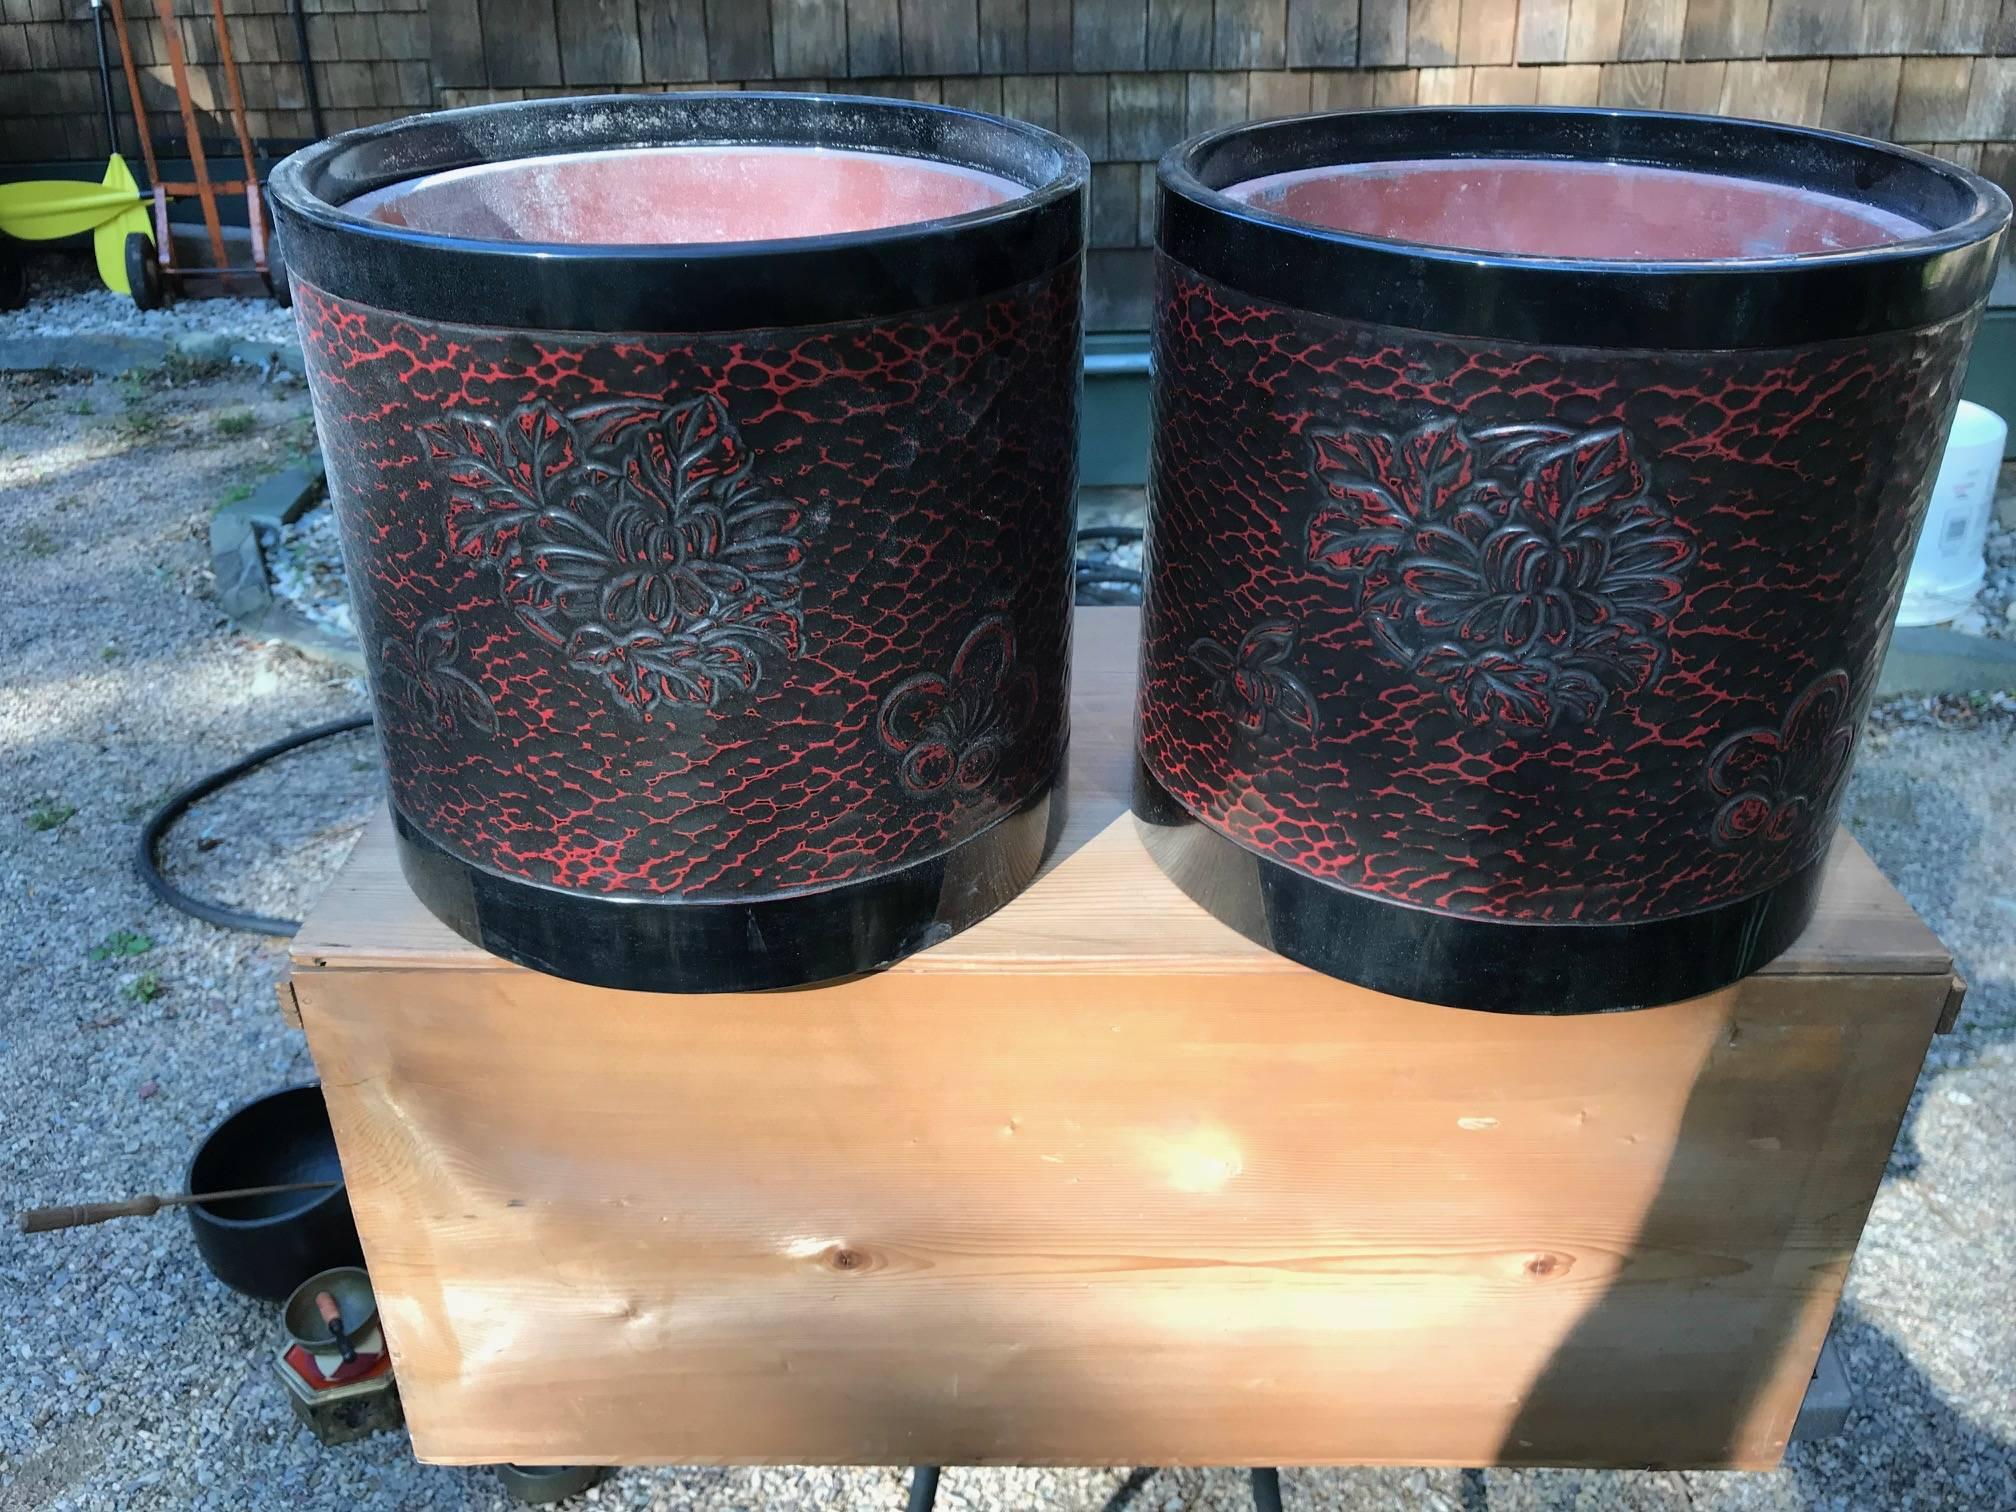 Glistening pair of (two) beautiful antique red lacquer carved chrysanthemum planters from old Japan dating to the early 1900s. The Original old kiri wood collector and storage box included .

A rare find. Fine quality.

Dimensions: Each is 12